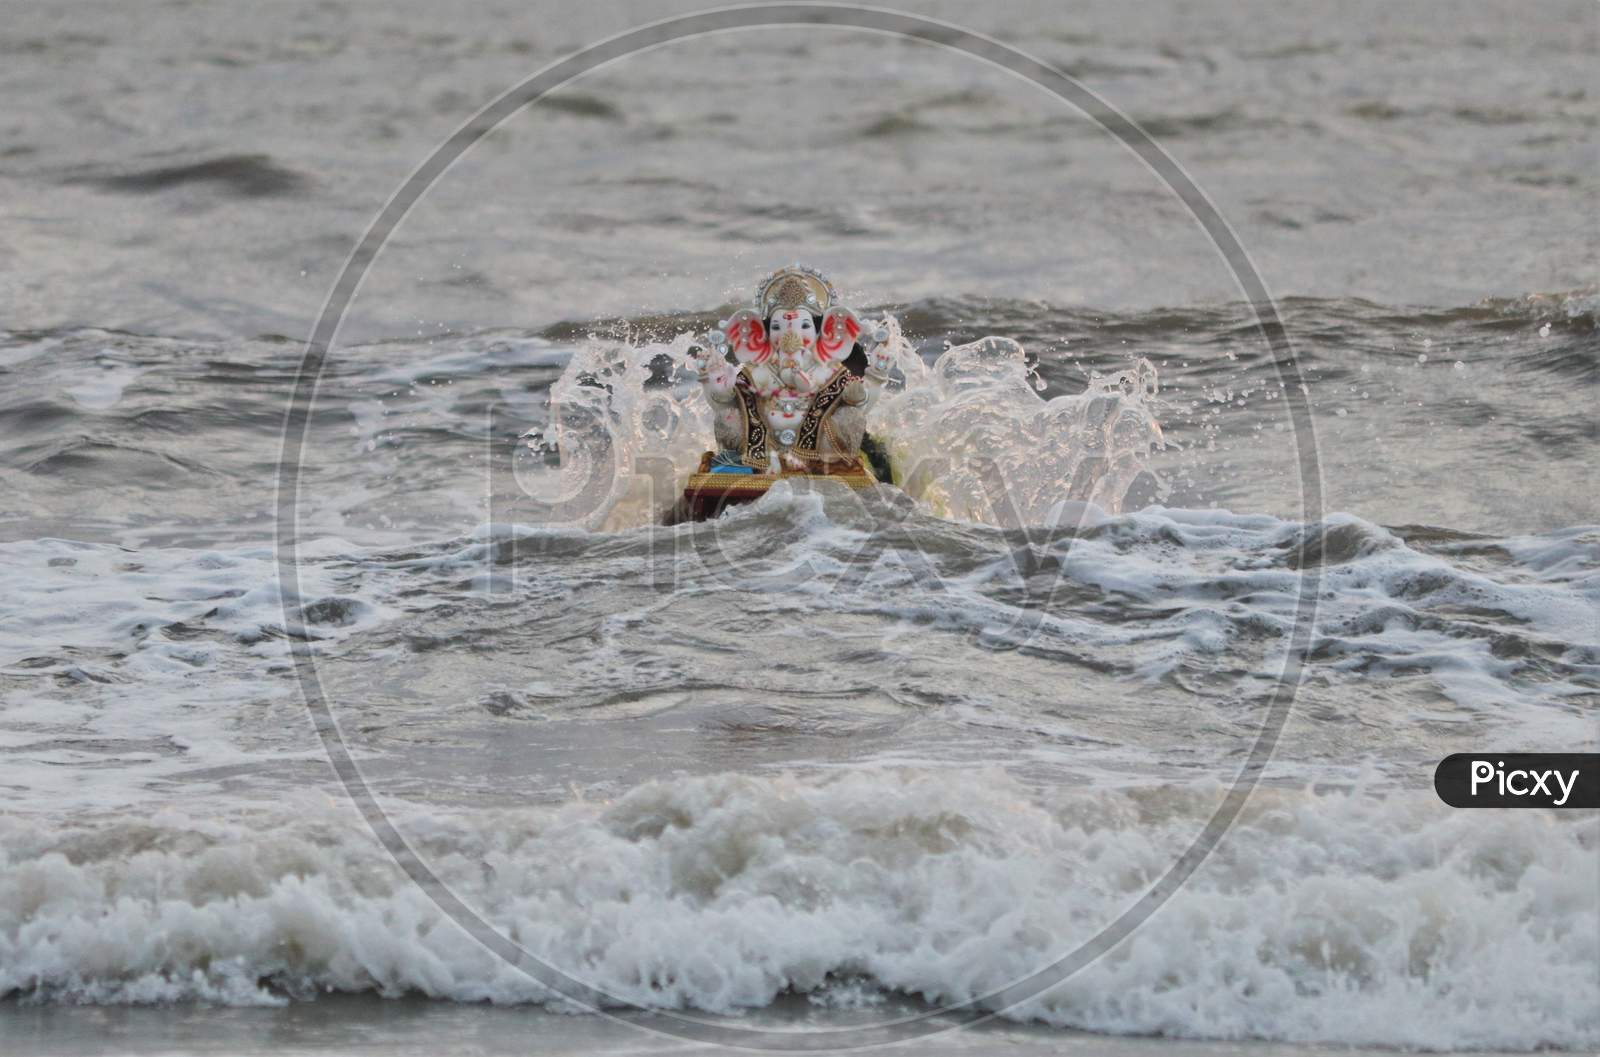 A man immerses an idol of the Hindu god Ganesh, the deity of prosperity, into the waters of the Arabian sea on the fifth day of the 10-day long Ganesh Chaturthi festival in Mumbai, India on August 26, 2020.